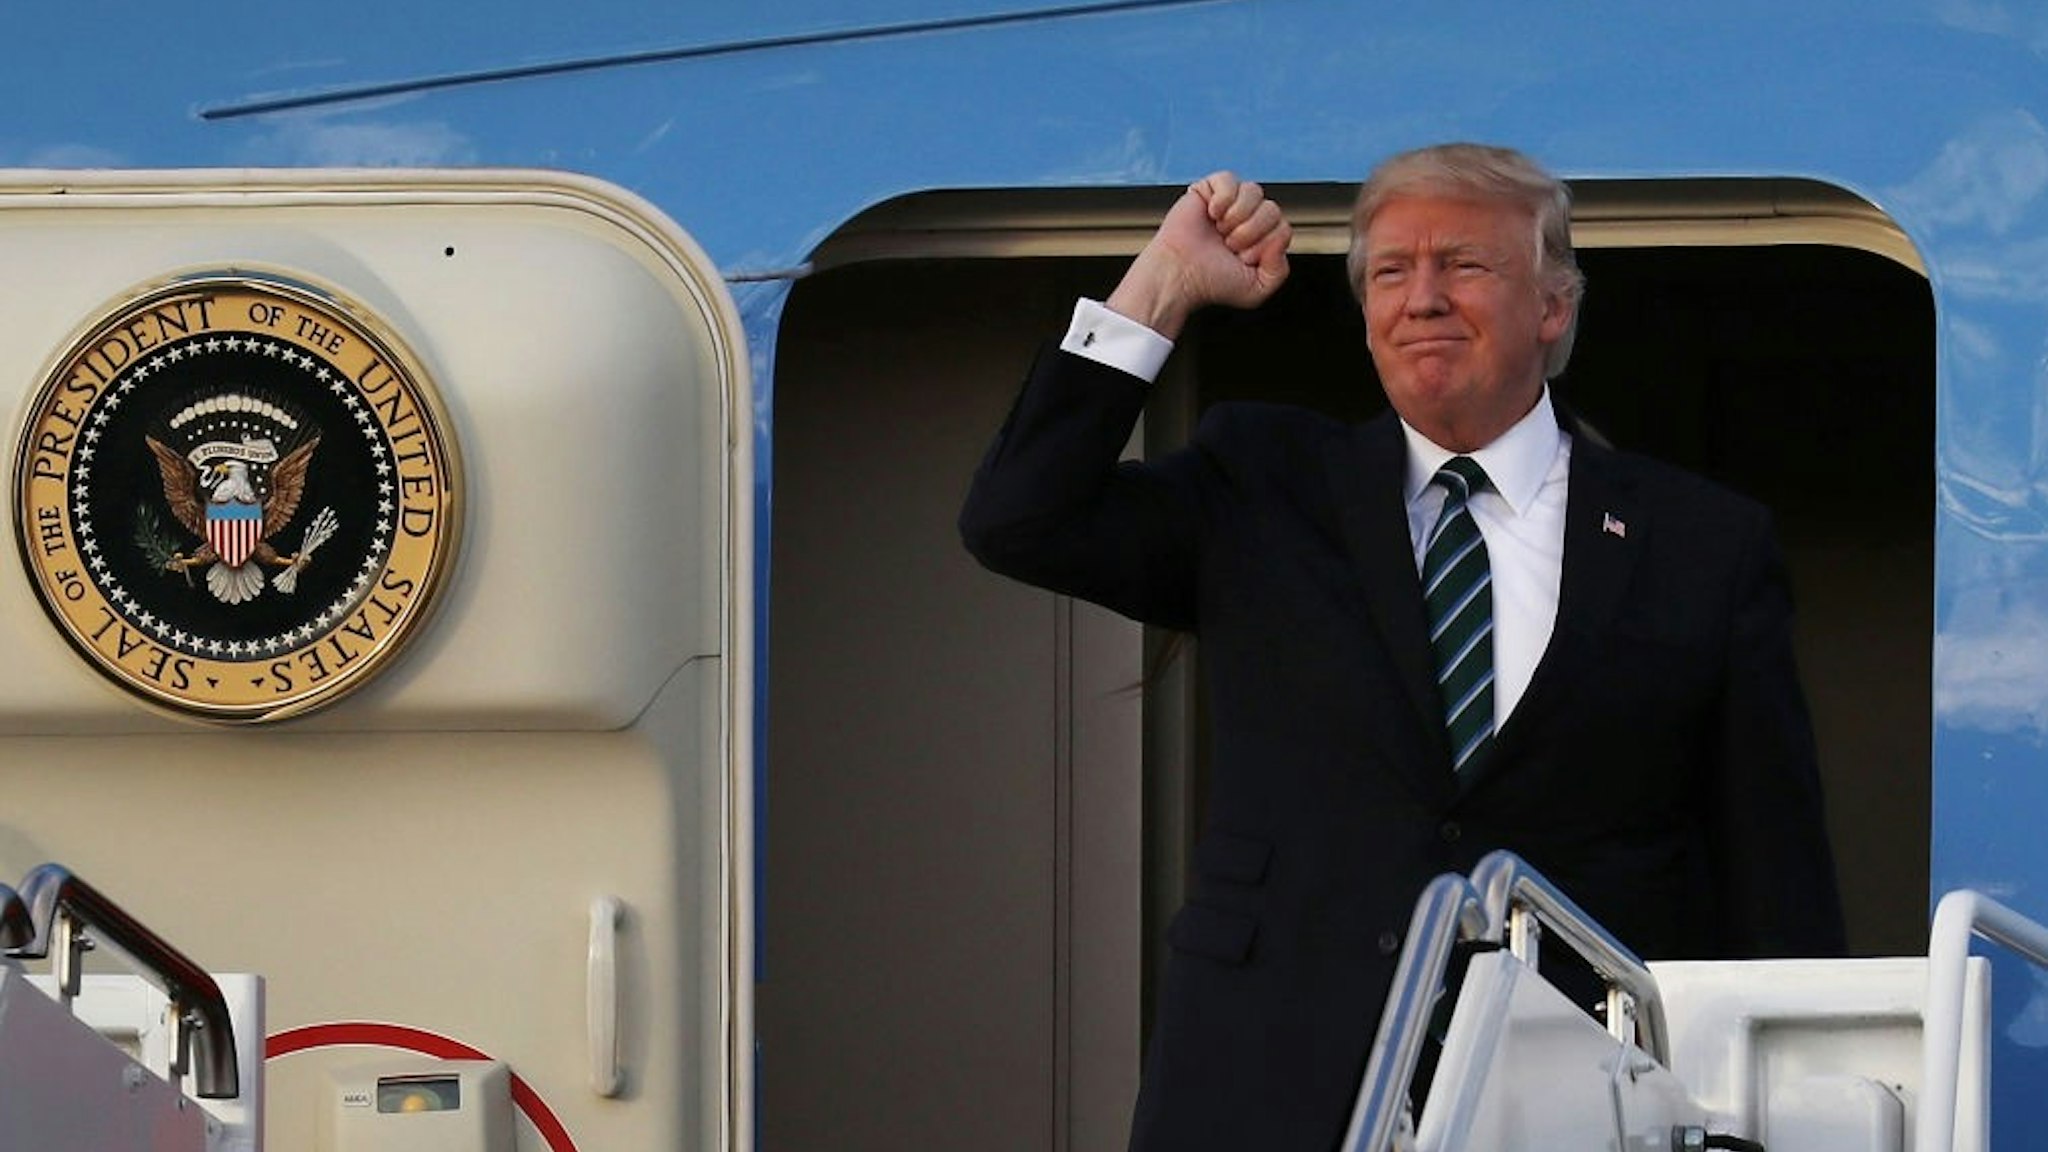 WEST PALM BEACH, FL - MARCH 17: U.S. President Donald Trump arrives on Air Force One at the Palm Beach International Airport to spend part of the weekend at Mar-a-Lago resort on March 17, 2017 in West Palm Beach, Florida. President Trump has made numerous trips to his Florida home since the inauguration. (Photo by